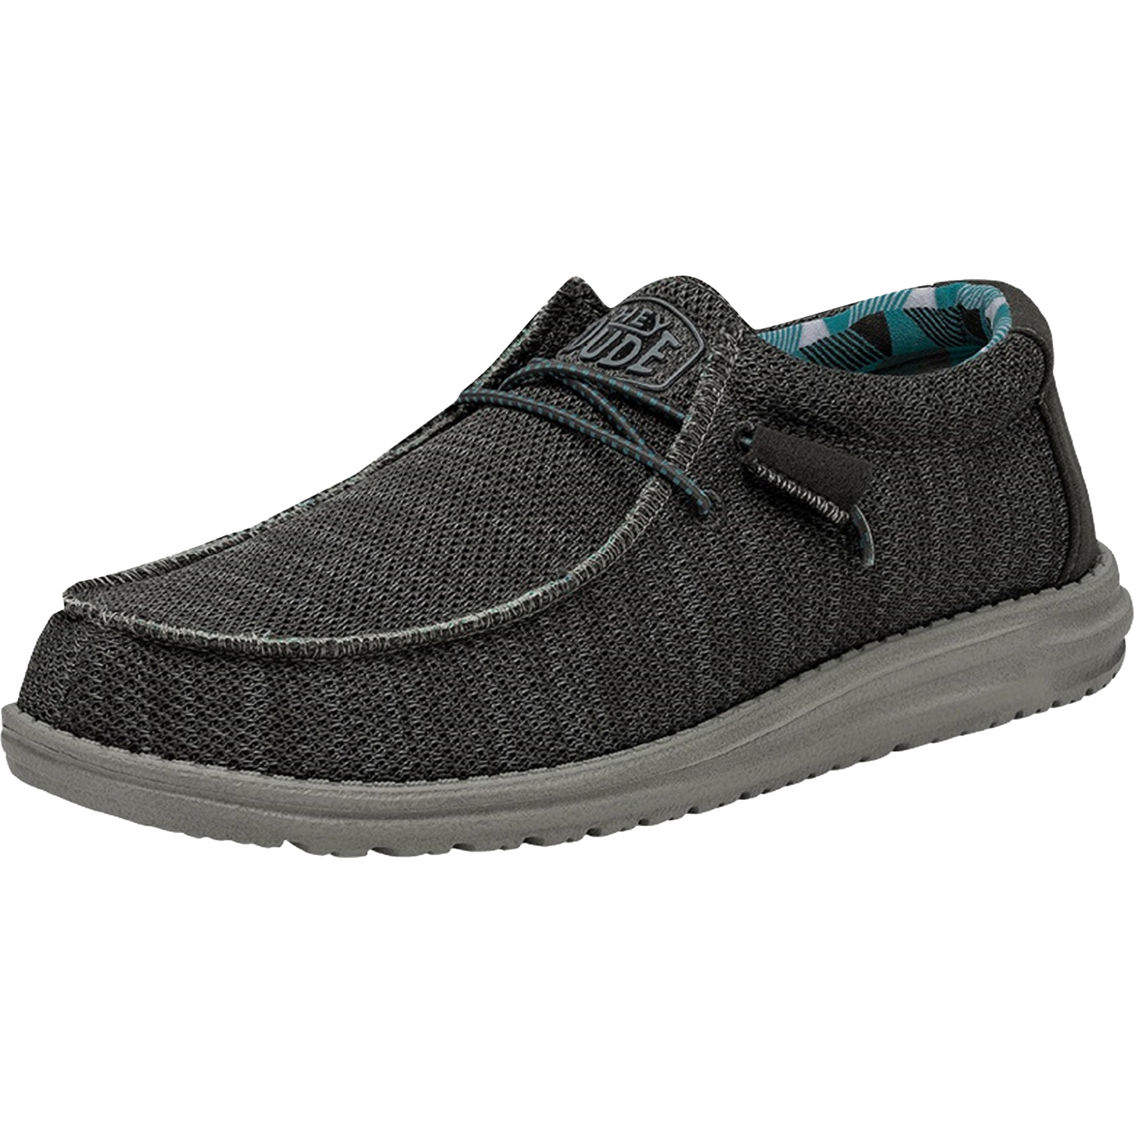 Hey Dude Men's Wally Sox Casual Shoes | Casuals | Shoes | Shop The Exchange